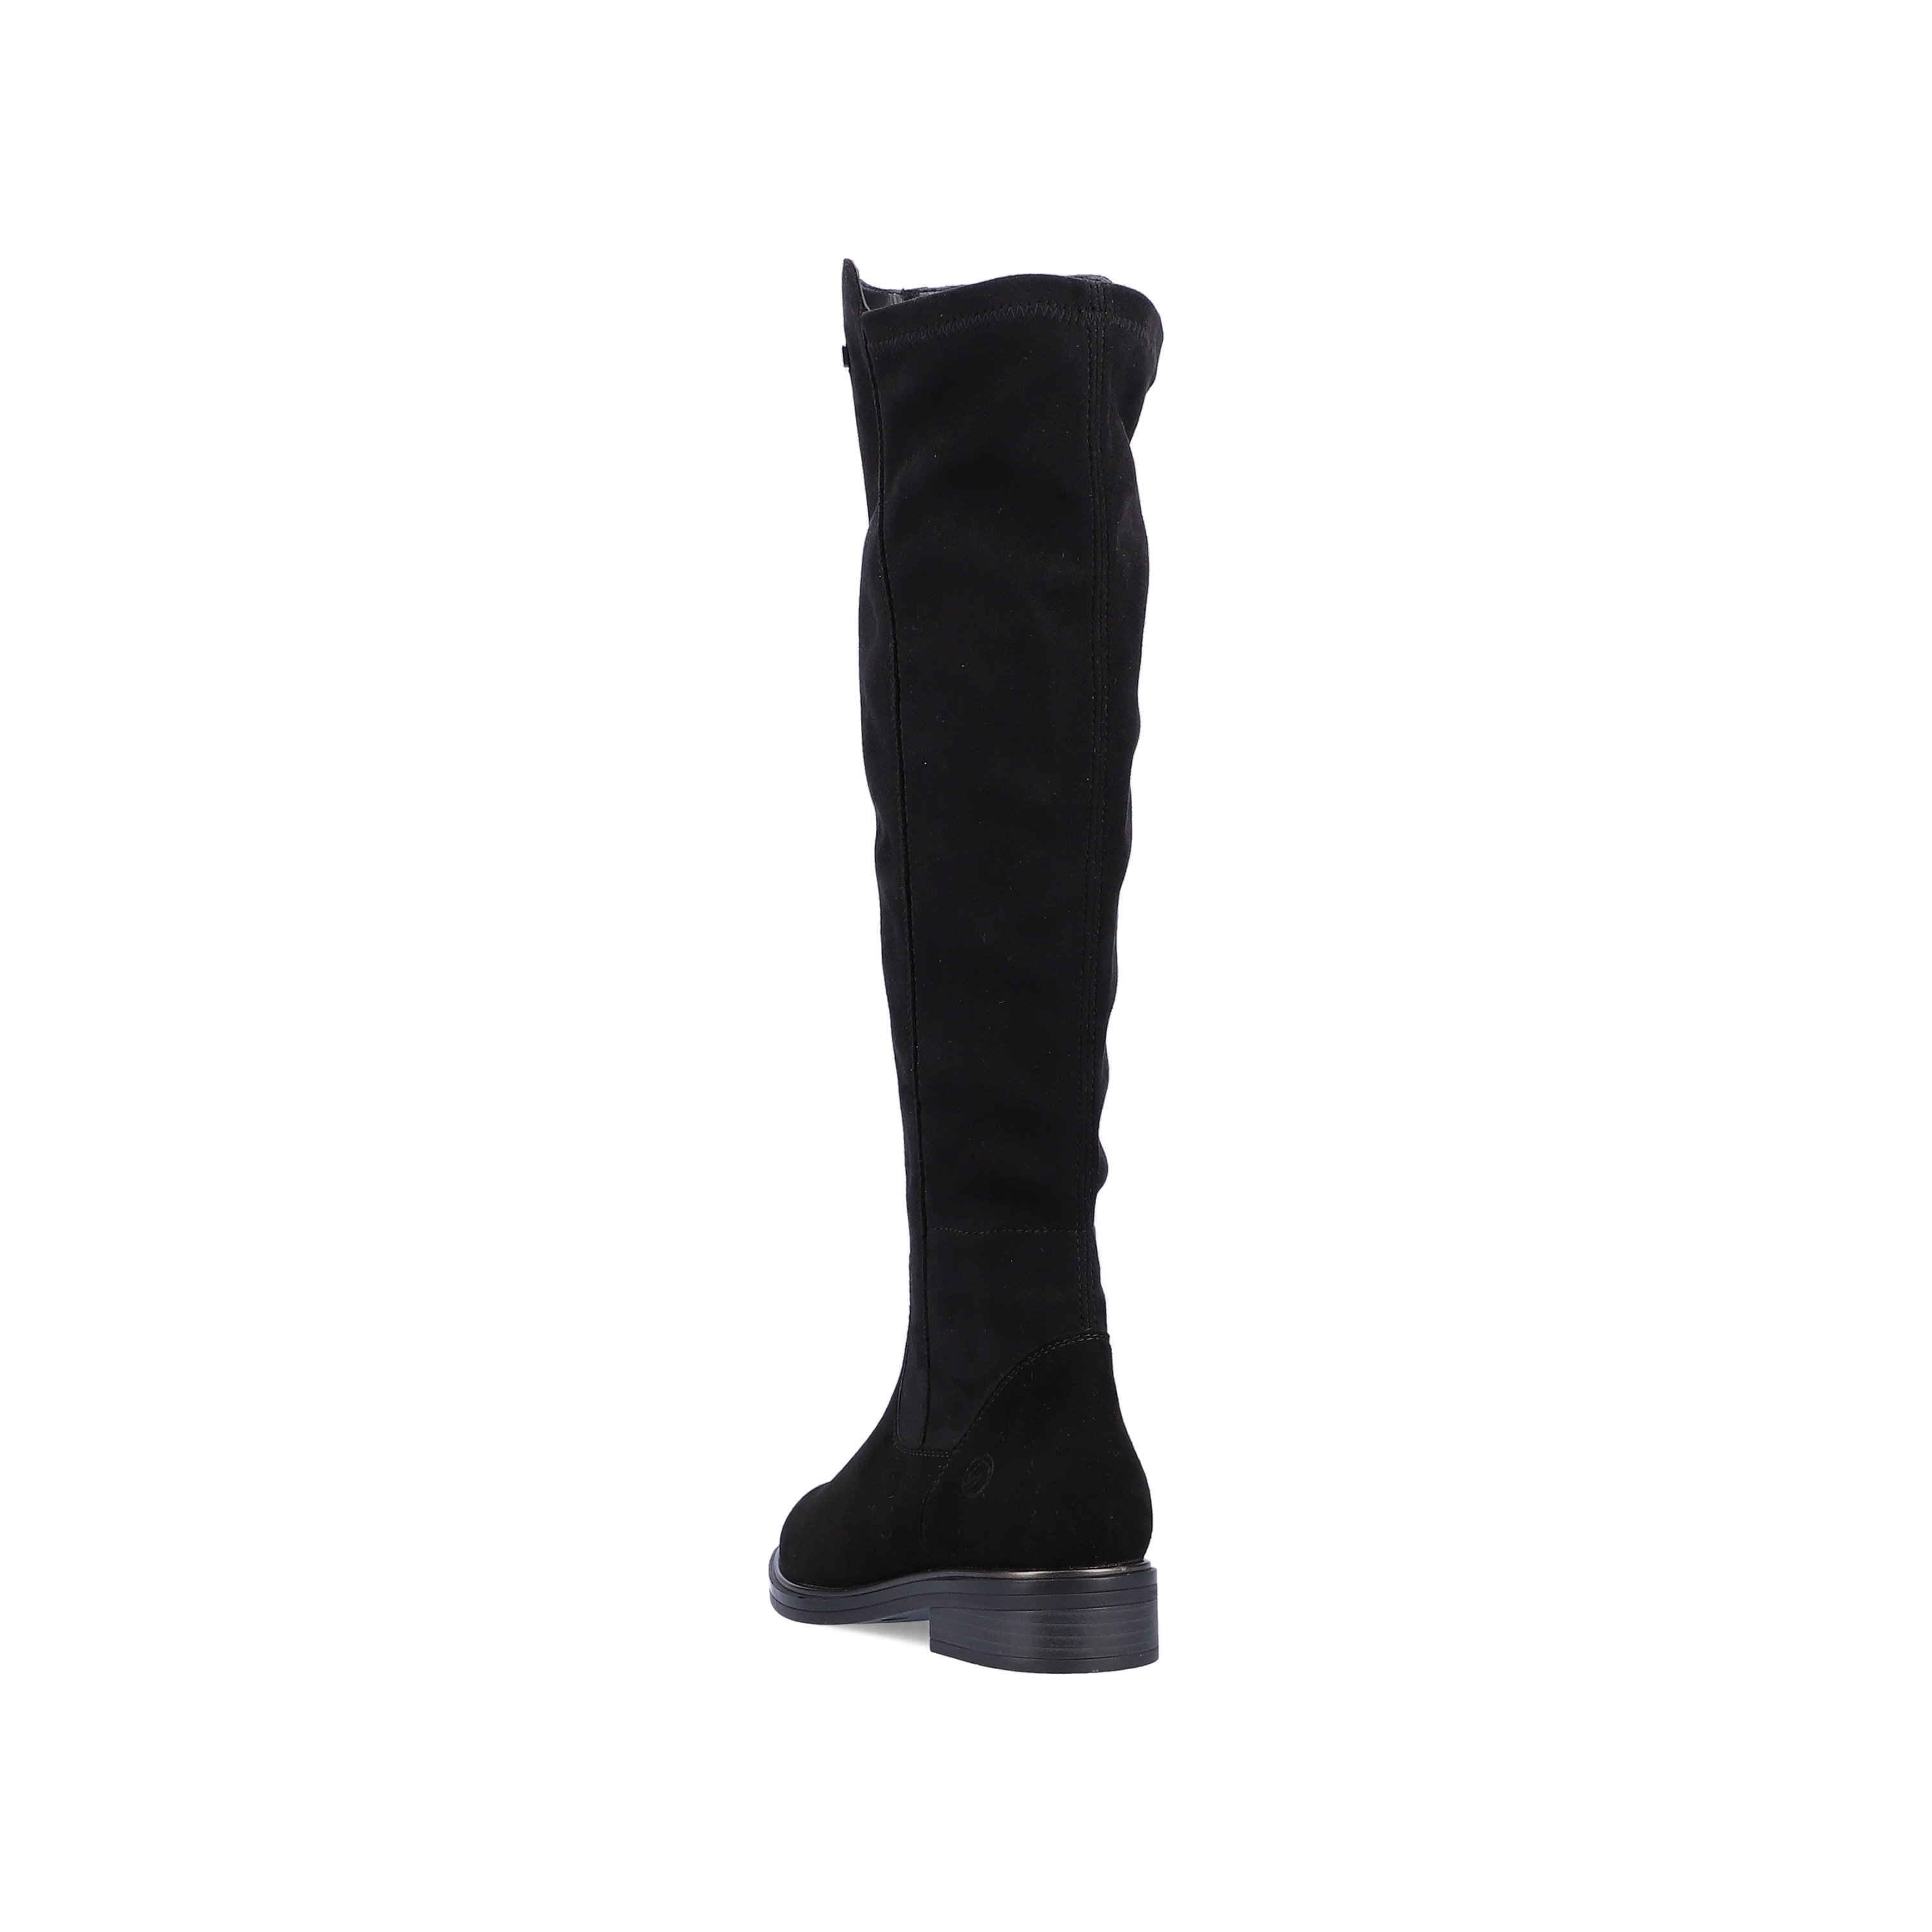 Jet black remonte women´s high boots D8387-02 with cushioning profile sole. Shoe from the back